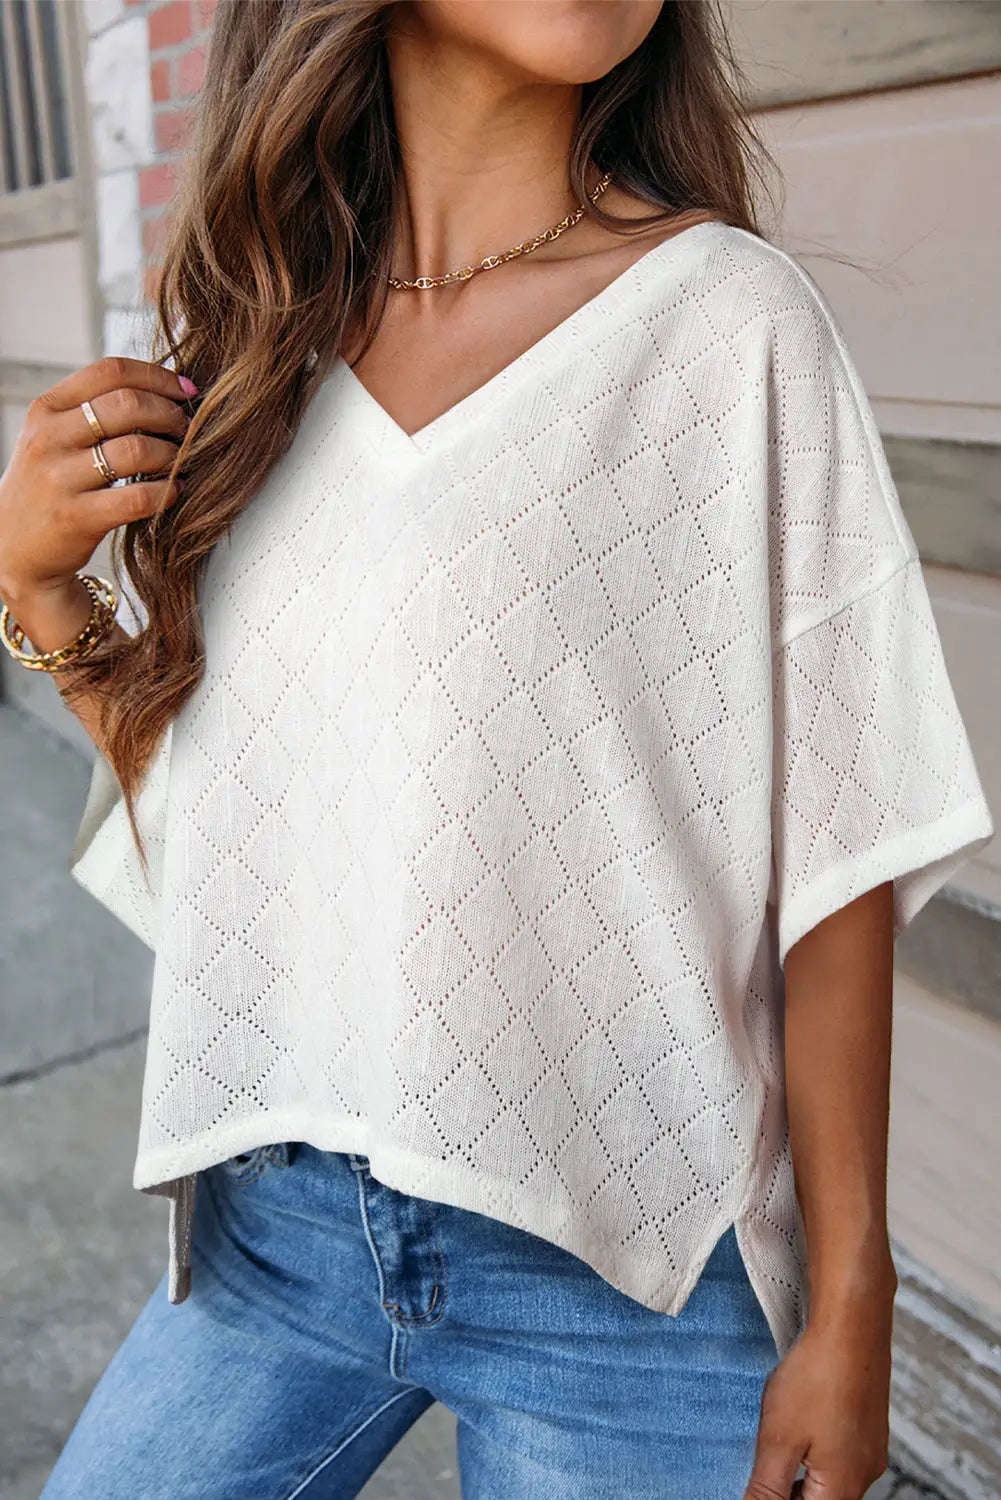 White v neck knitted flowy blouse - l / 100% polyester - blouses & shirts